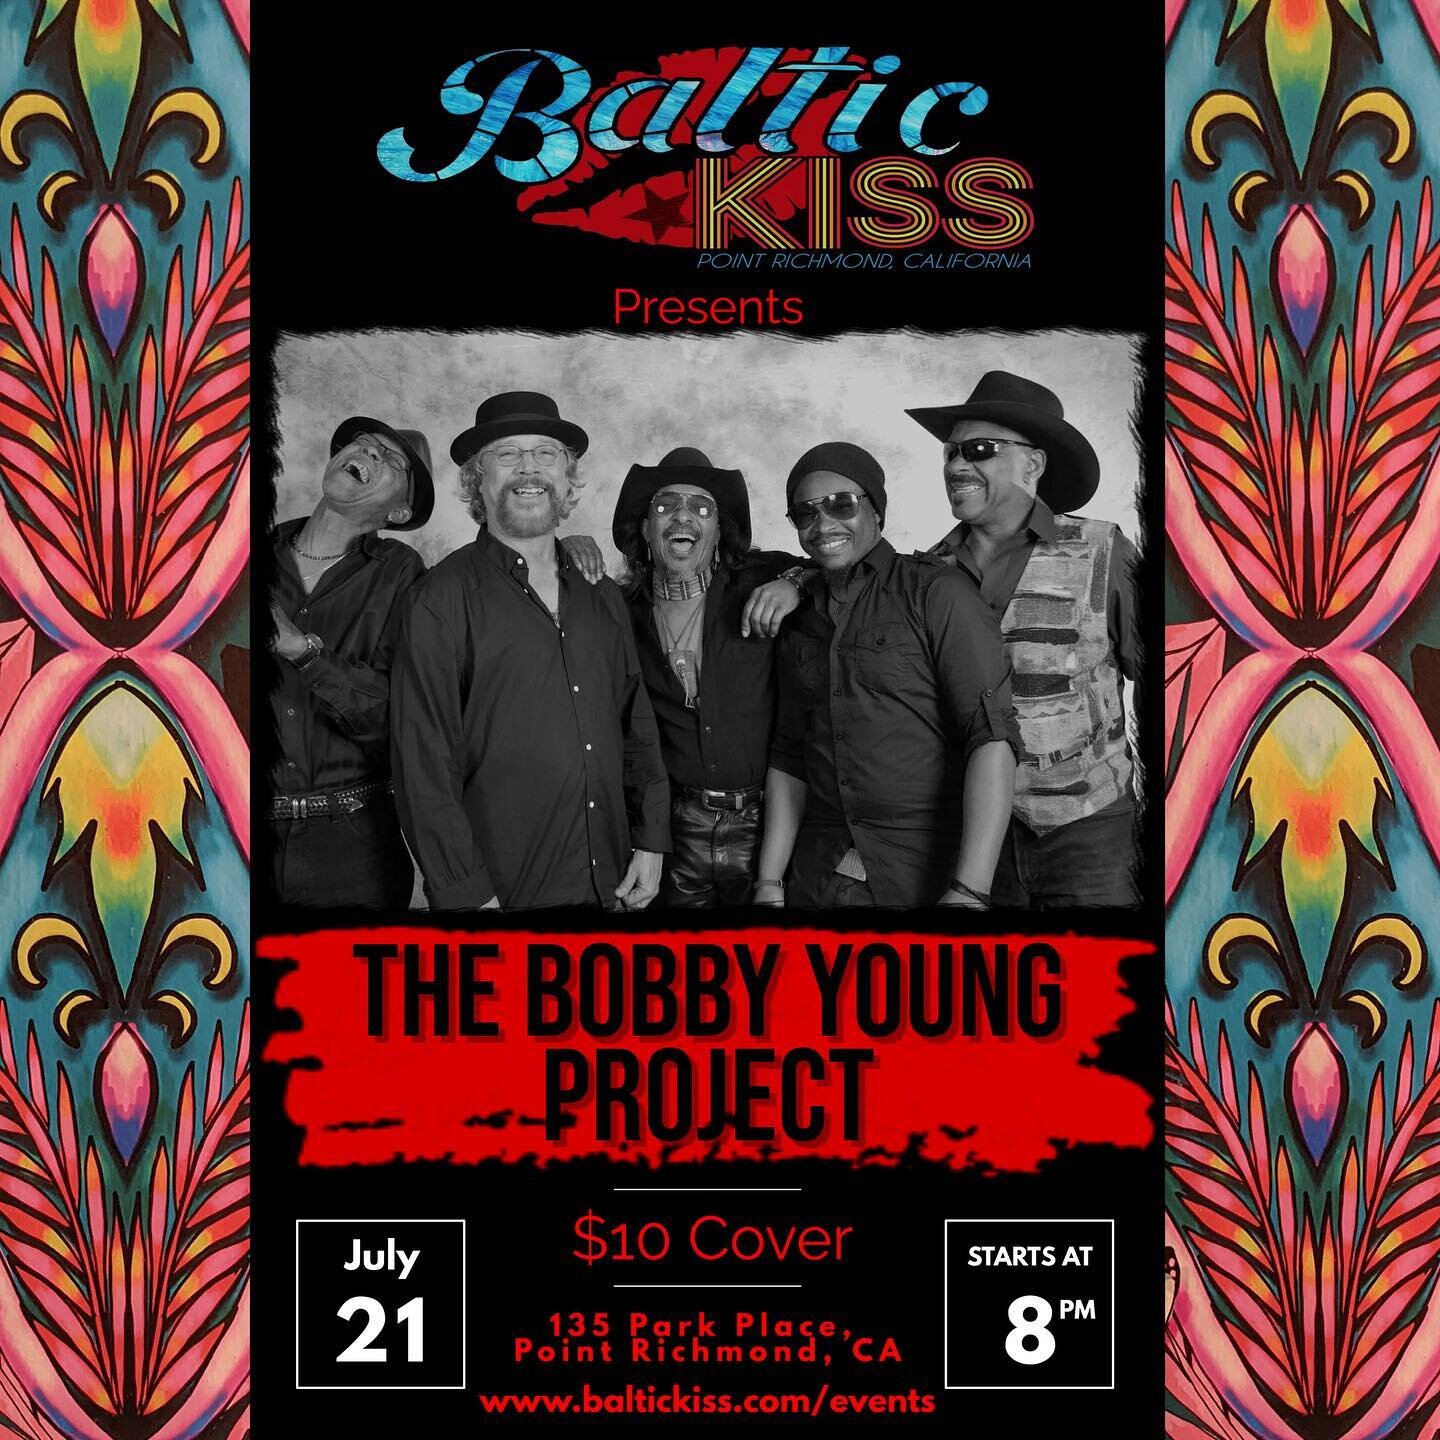 The Bobby Young project is back tonight y&rsquo;all! If you made it to their first show you know why. Come play wit us!

#bayareamusic #bayareamusician #bayareamusicscene #bayareamusicians #richmondca #richmondcalifornia #pointrichmondca #pointrichmo